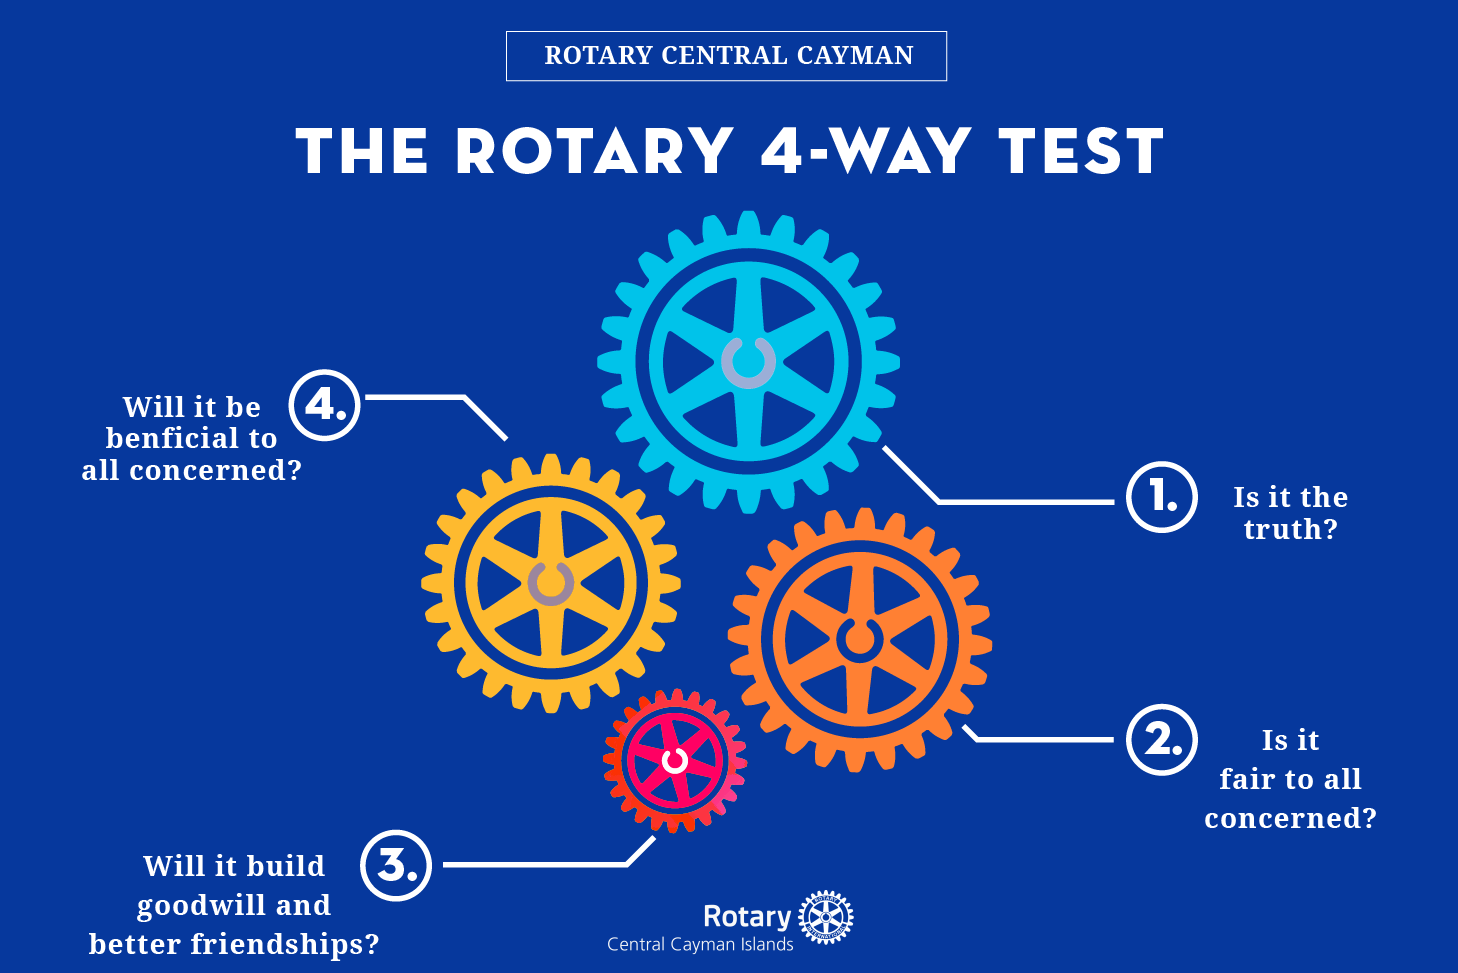 The 4-way Test